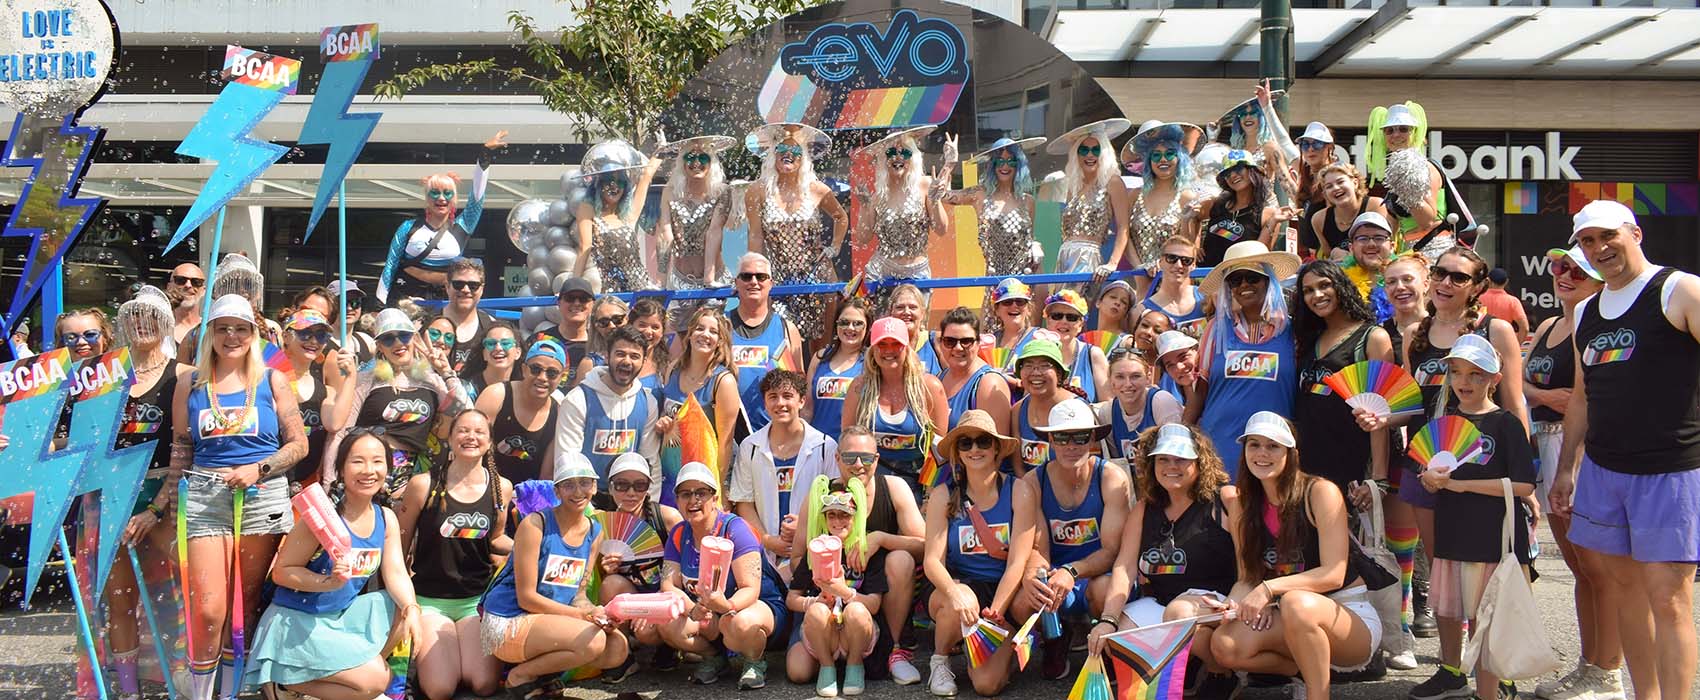 BCAA and Evo employees pose in front of large BCAA and Evo pride parade float